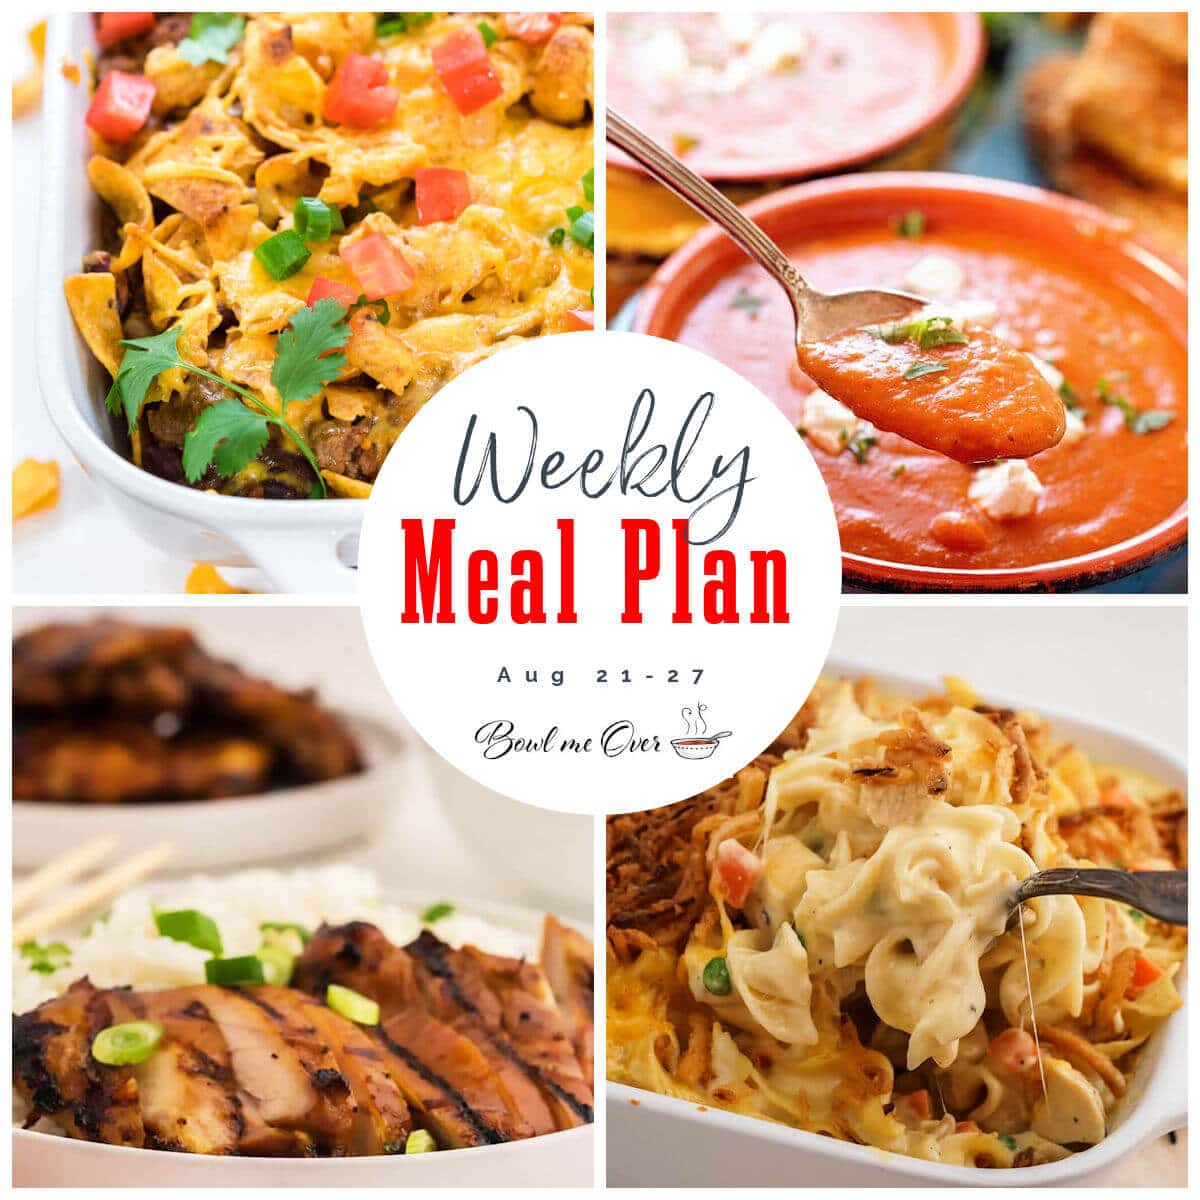 Weekly Meal Plan 34 with collage of photos for recipes. With print overlay for social media.